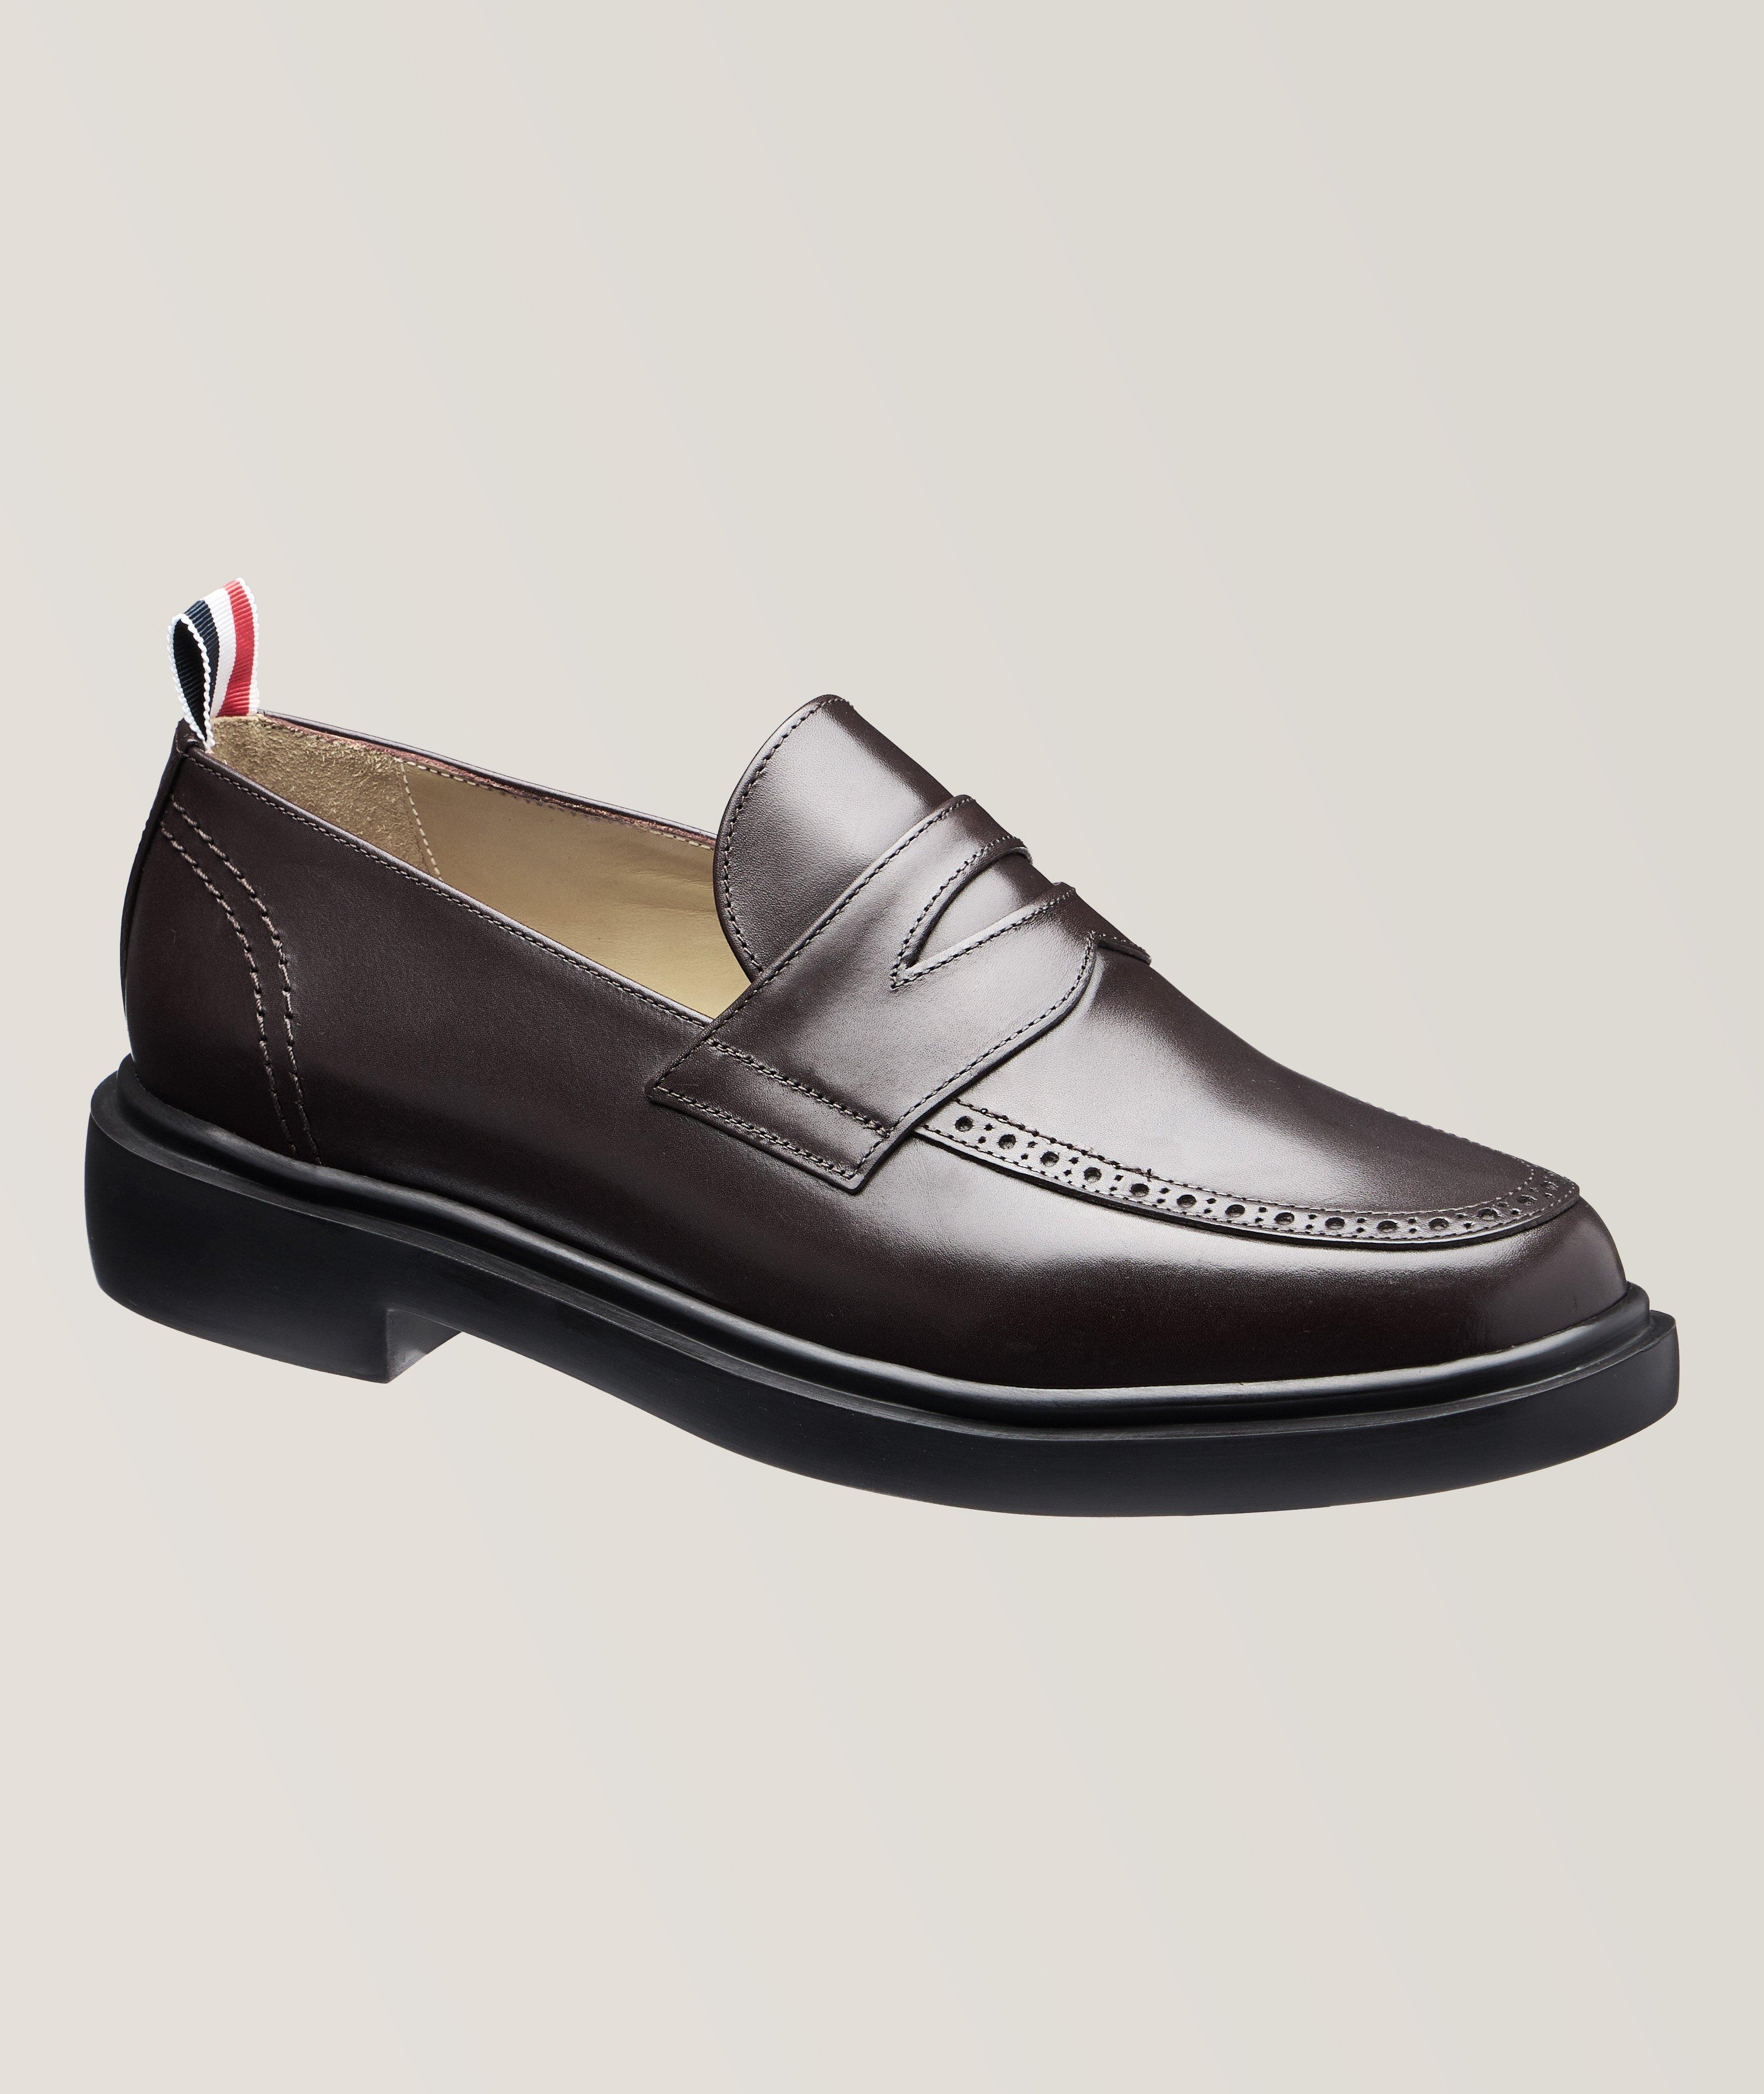 Thom Browne Polished Leather Penny Loafers